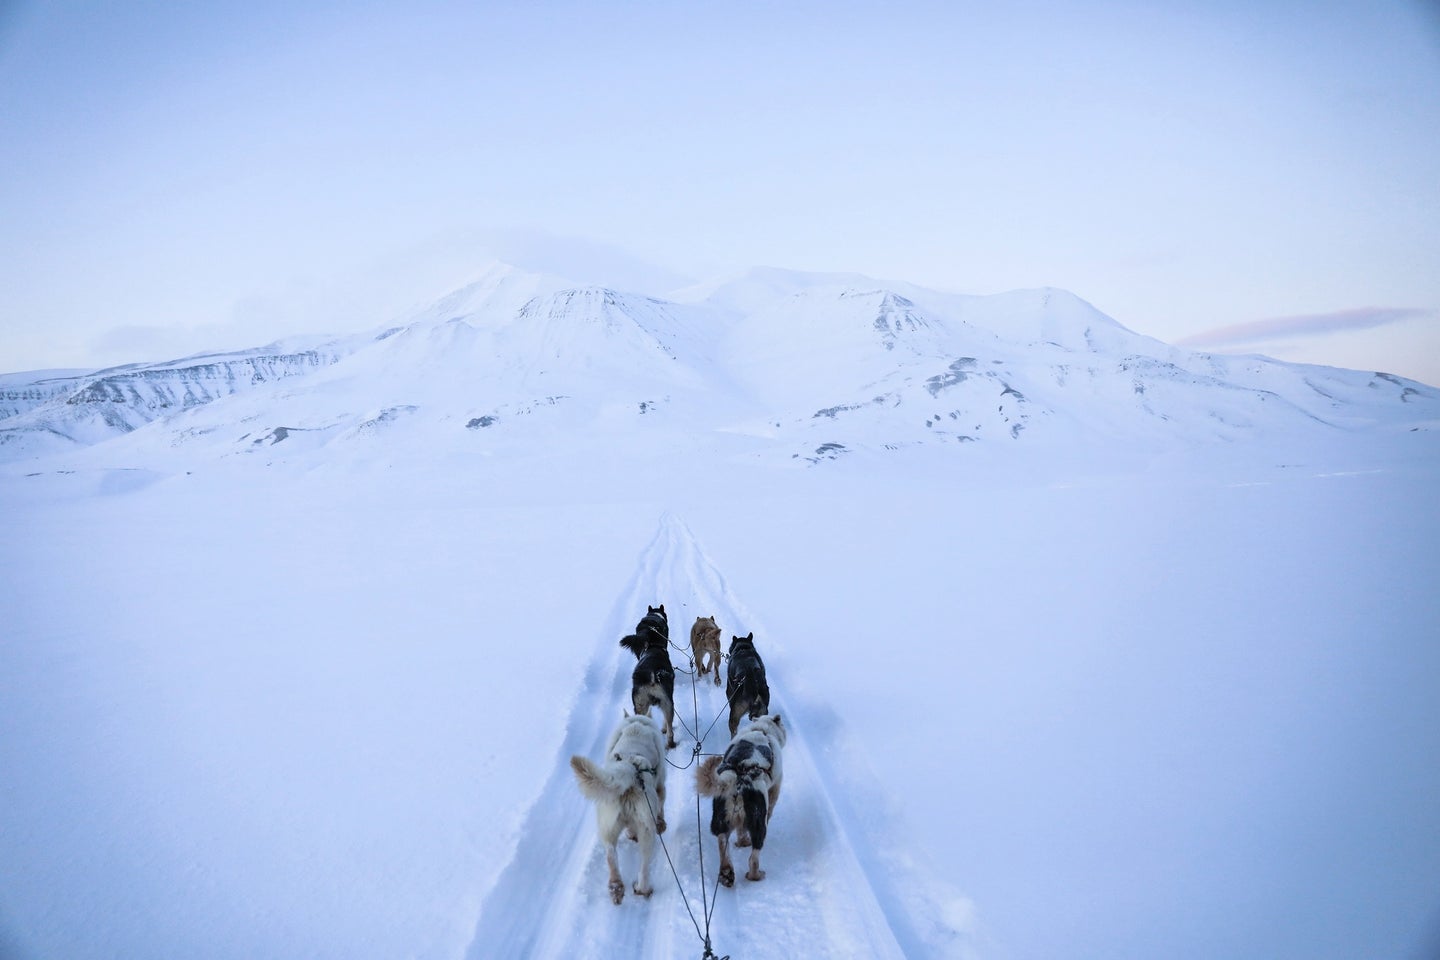 Husky dogs pulling a sled in a snowy landscape